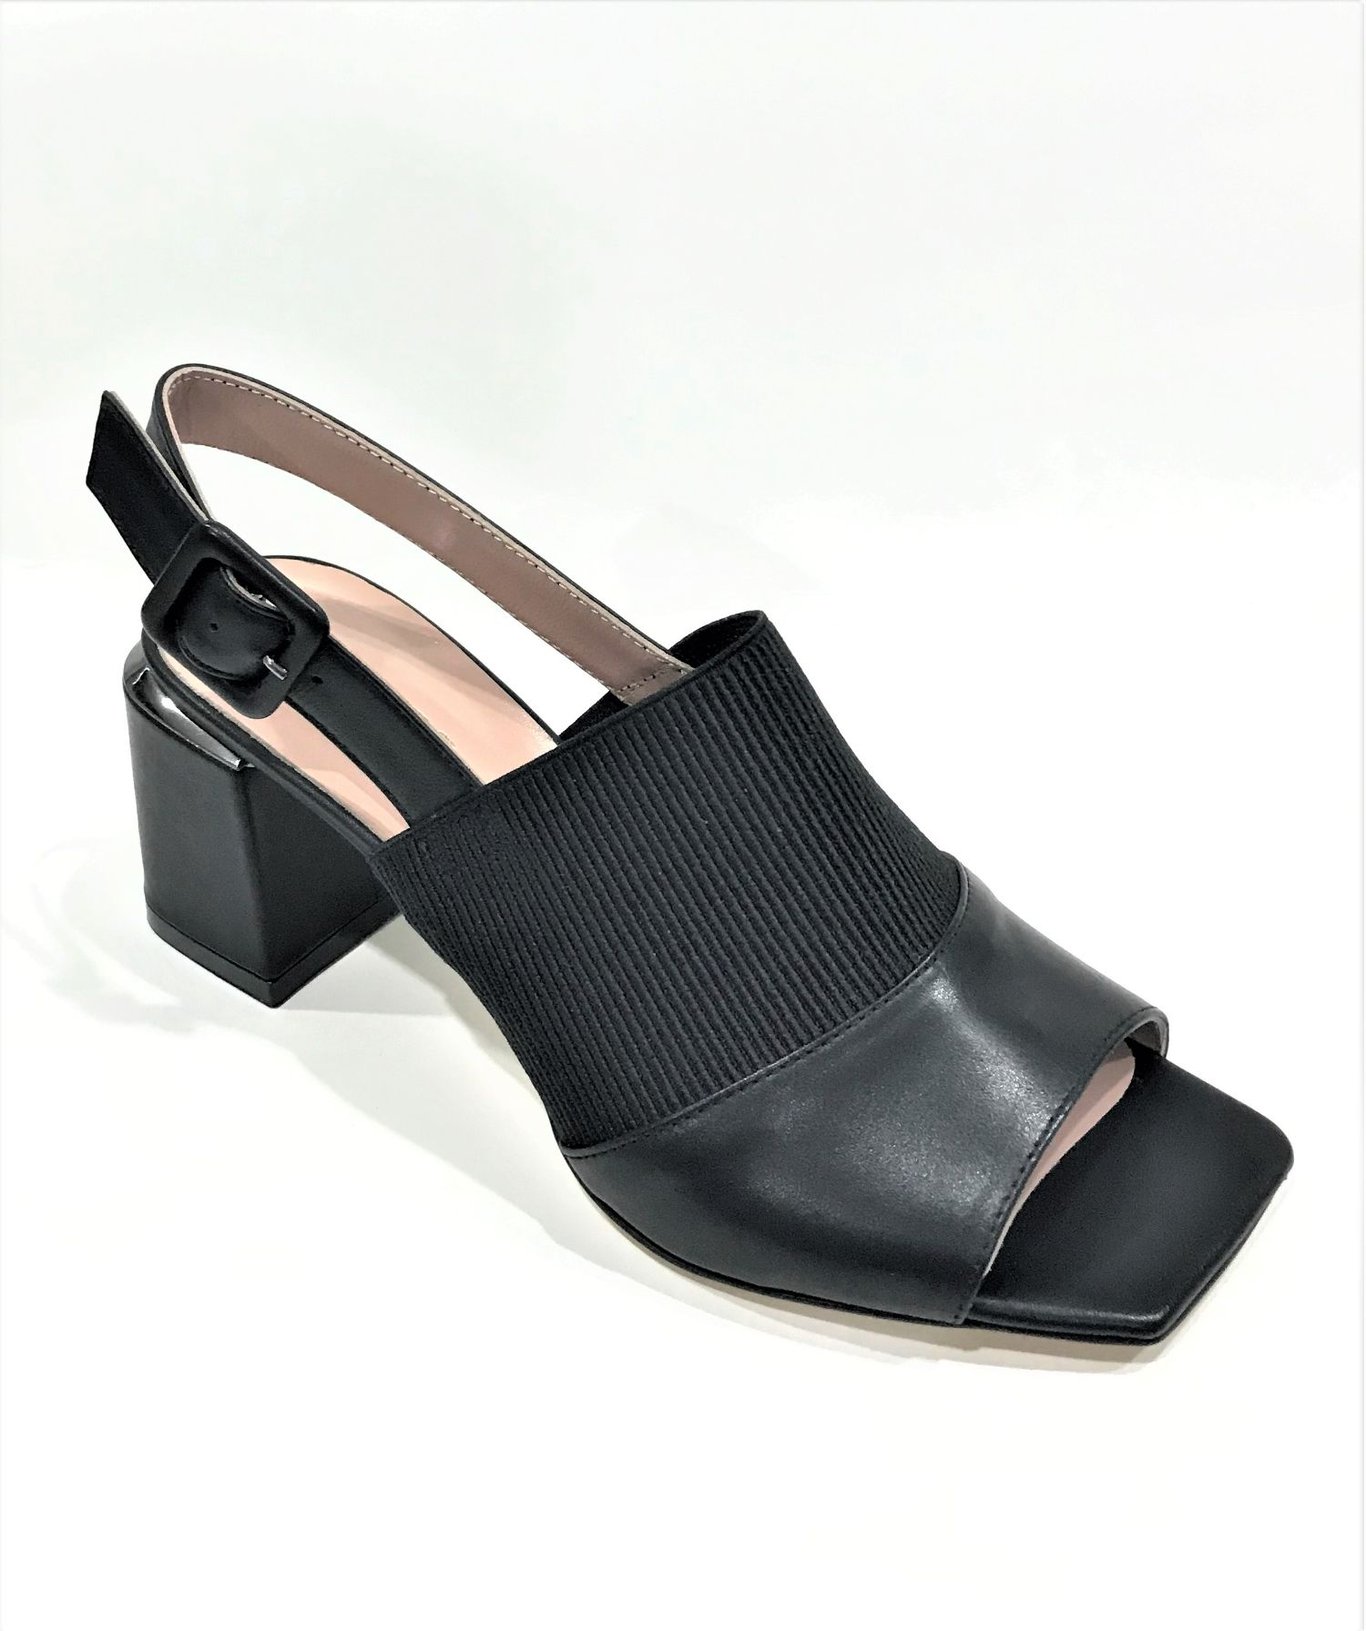 black leather women sandals with imported band